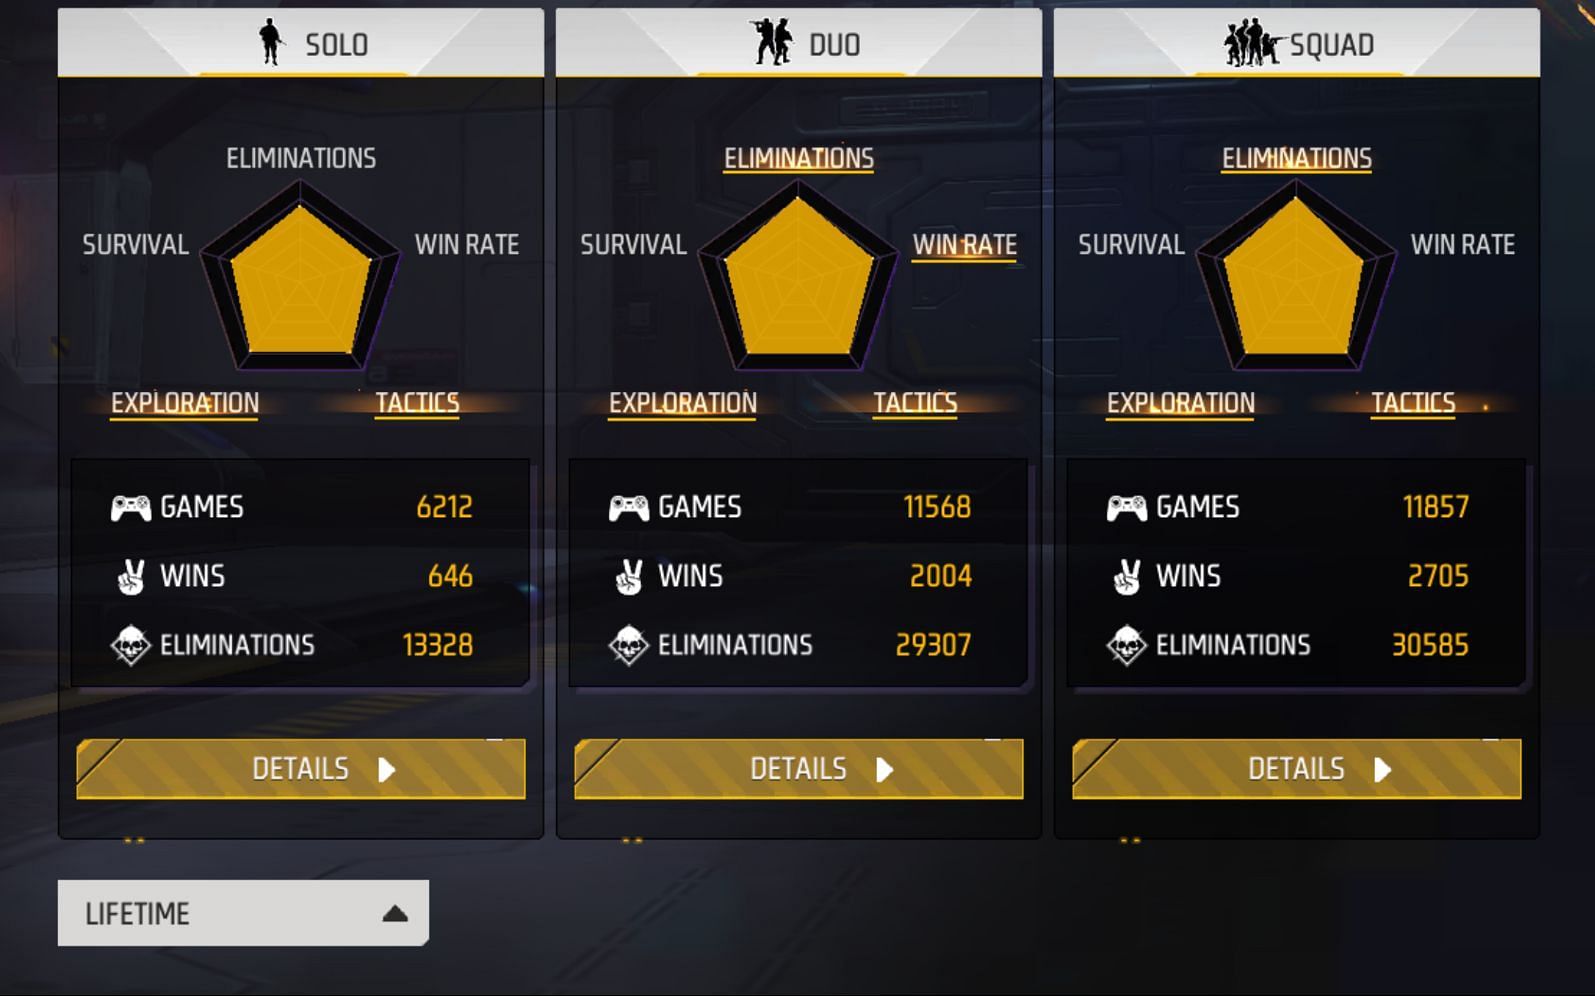 She has more than 30k frags in squad matches (Image via Garena)